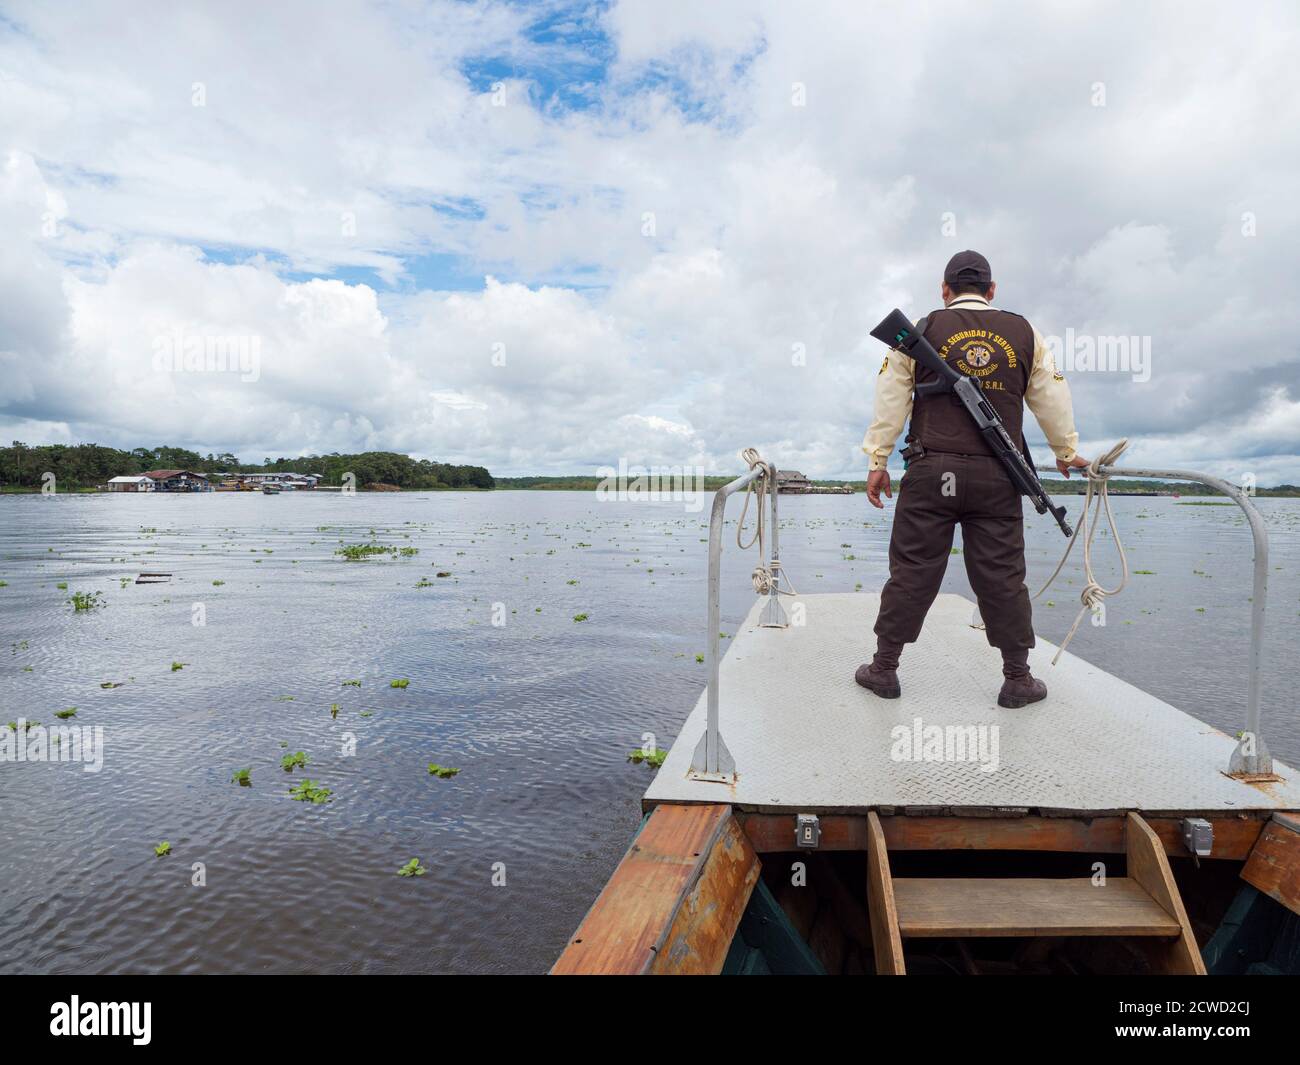 Armed guard escorts tourists to lunch on the Amazon River near Iquitos, Peru. Stock Photo